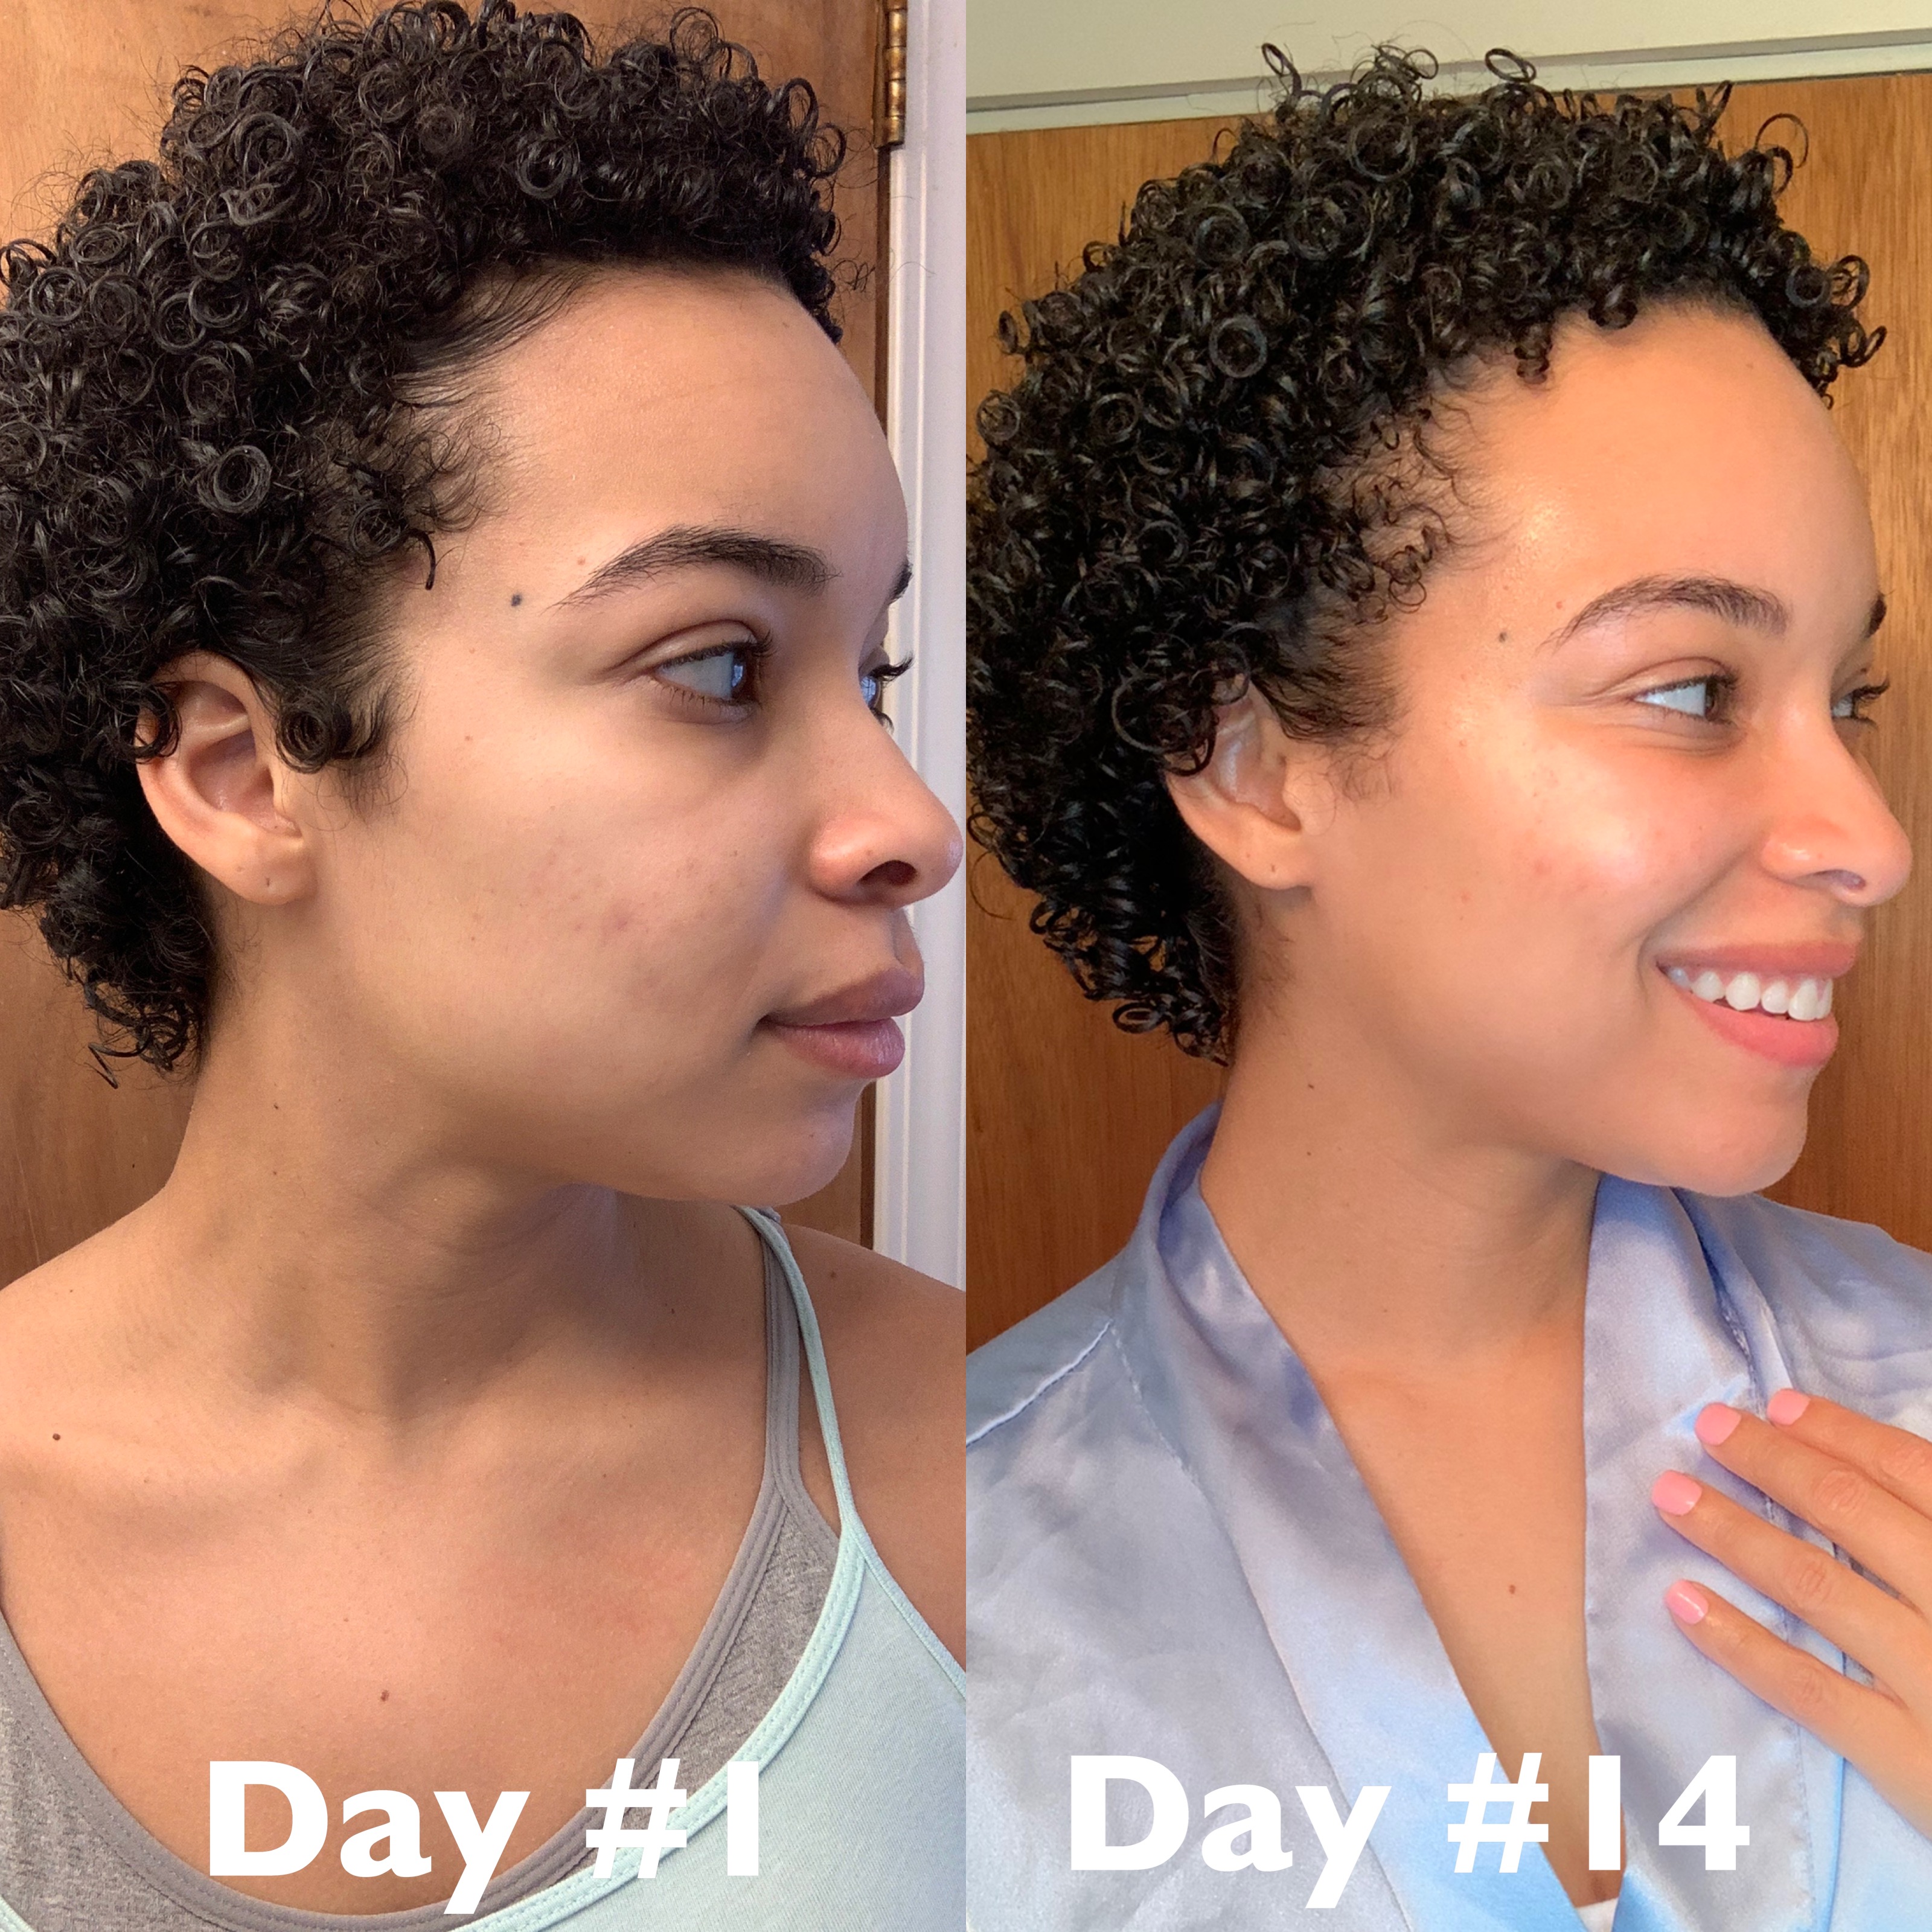 Before and after glowing skin with Palmer's Skin Success collection